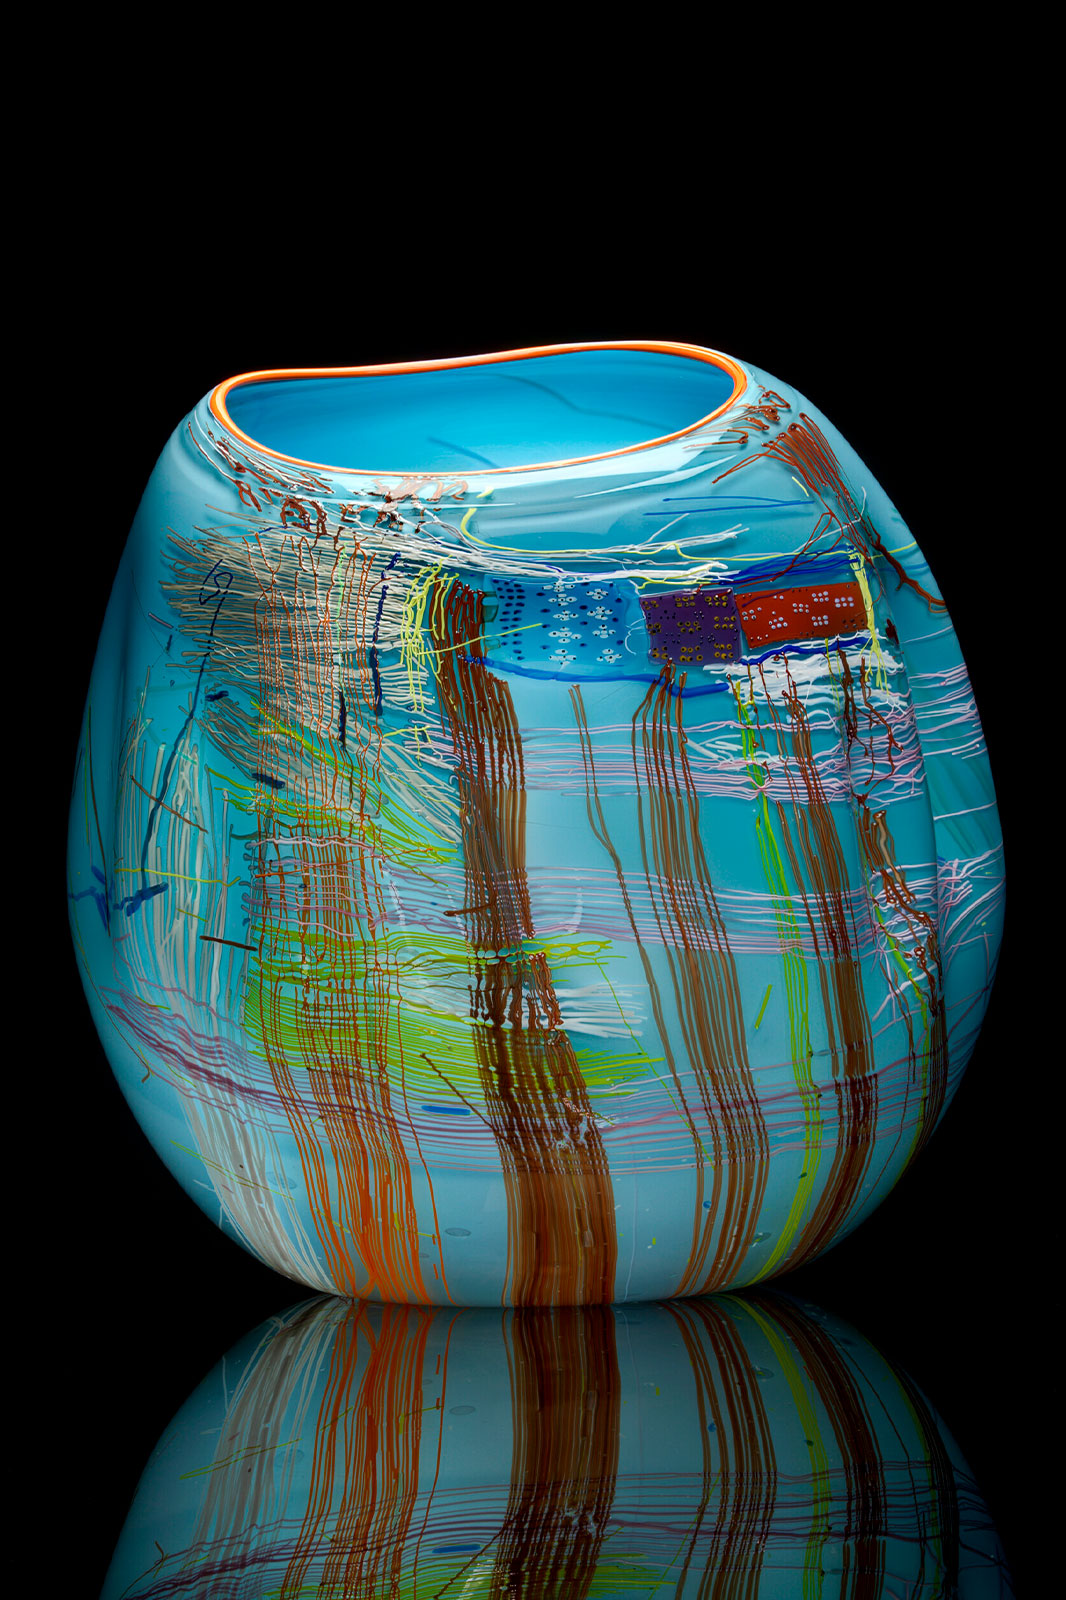 Azure Soft Cylinder with Persimmon Lip Wrap, 2014 by Dale Chihuly